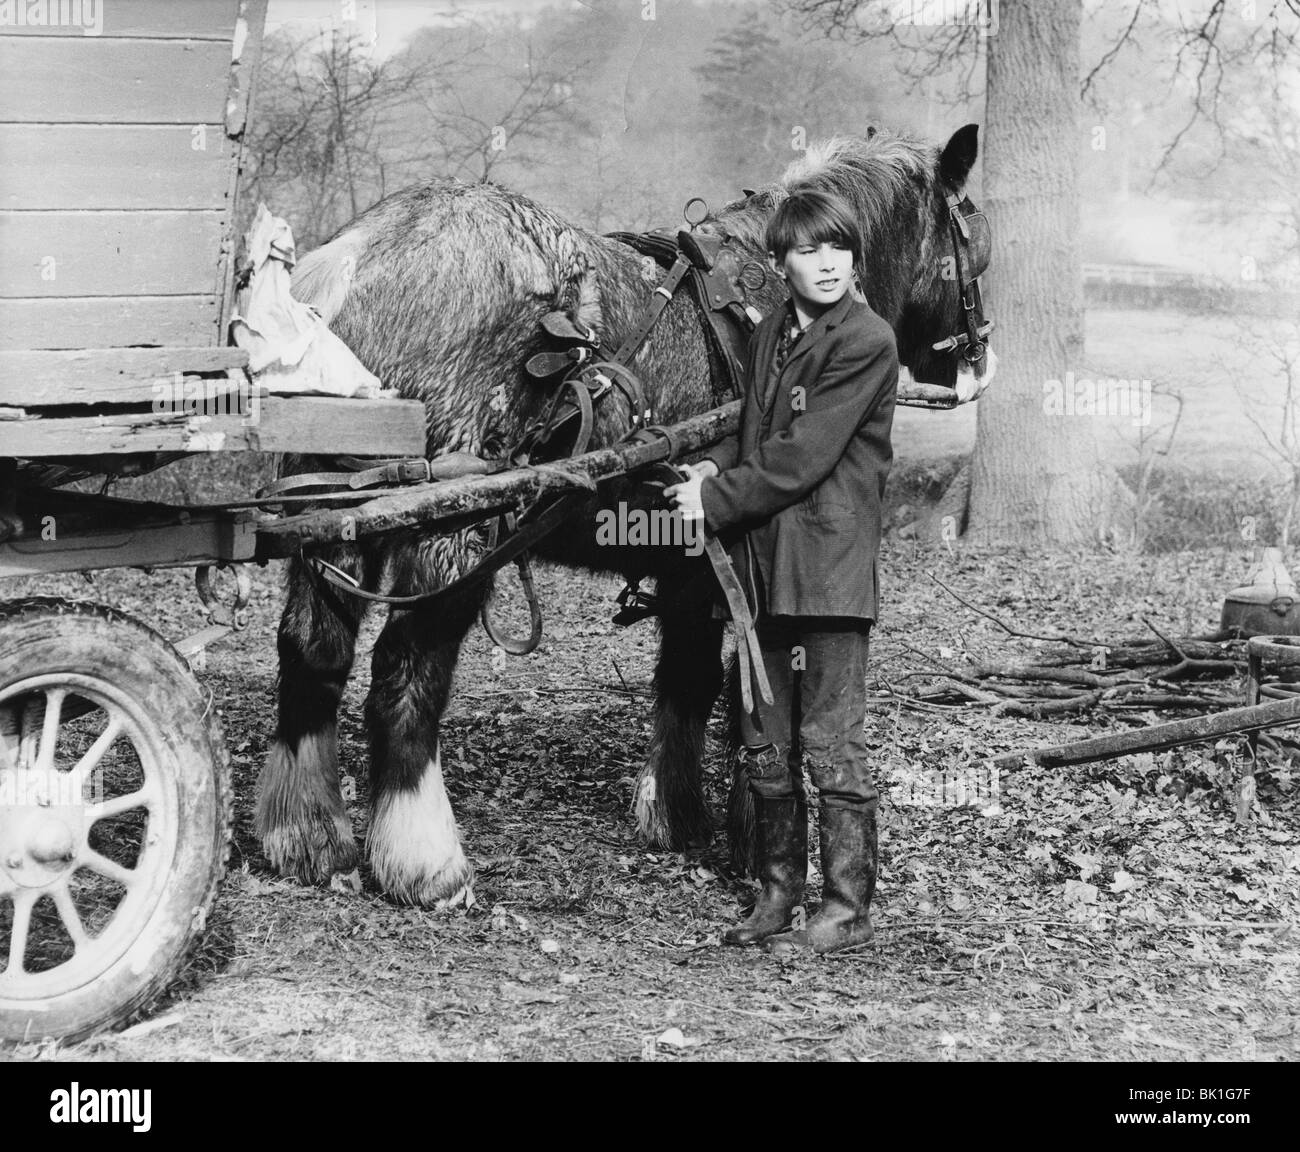 Young gypsy with a horse, 1960s. Stock Photo